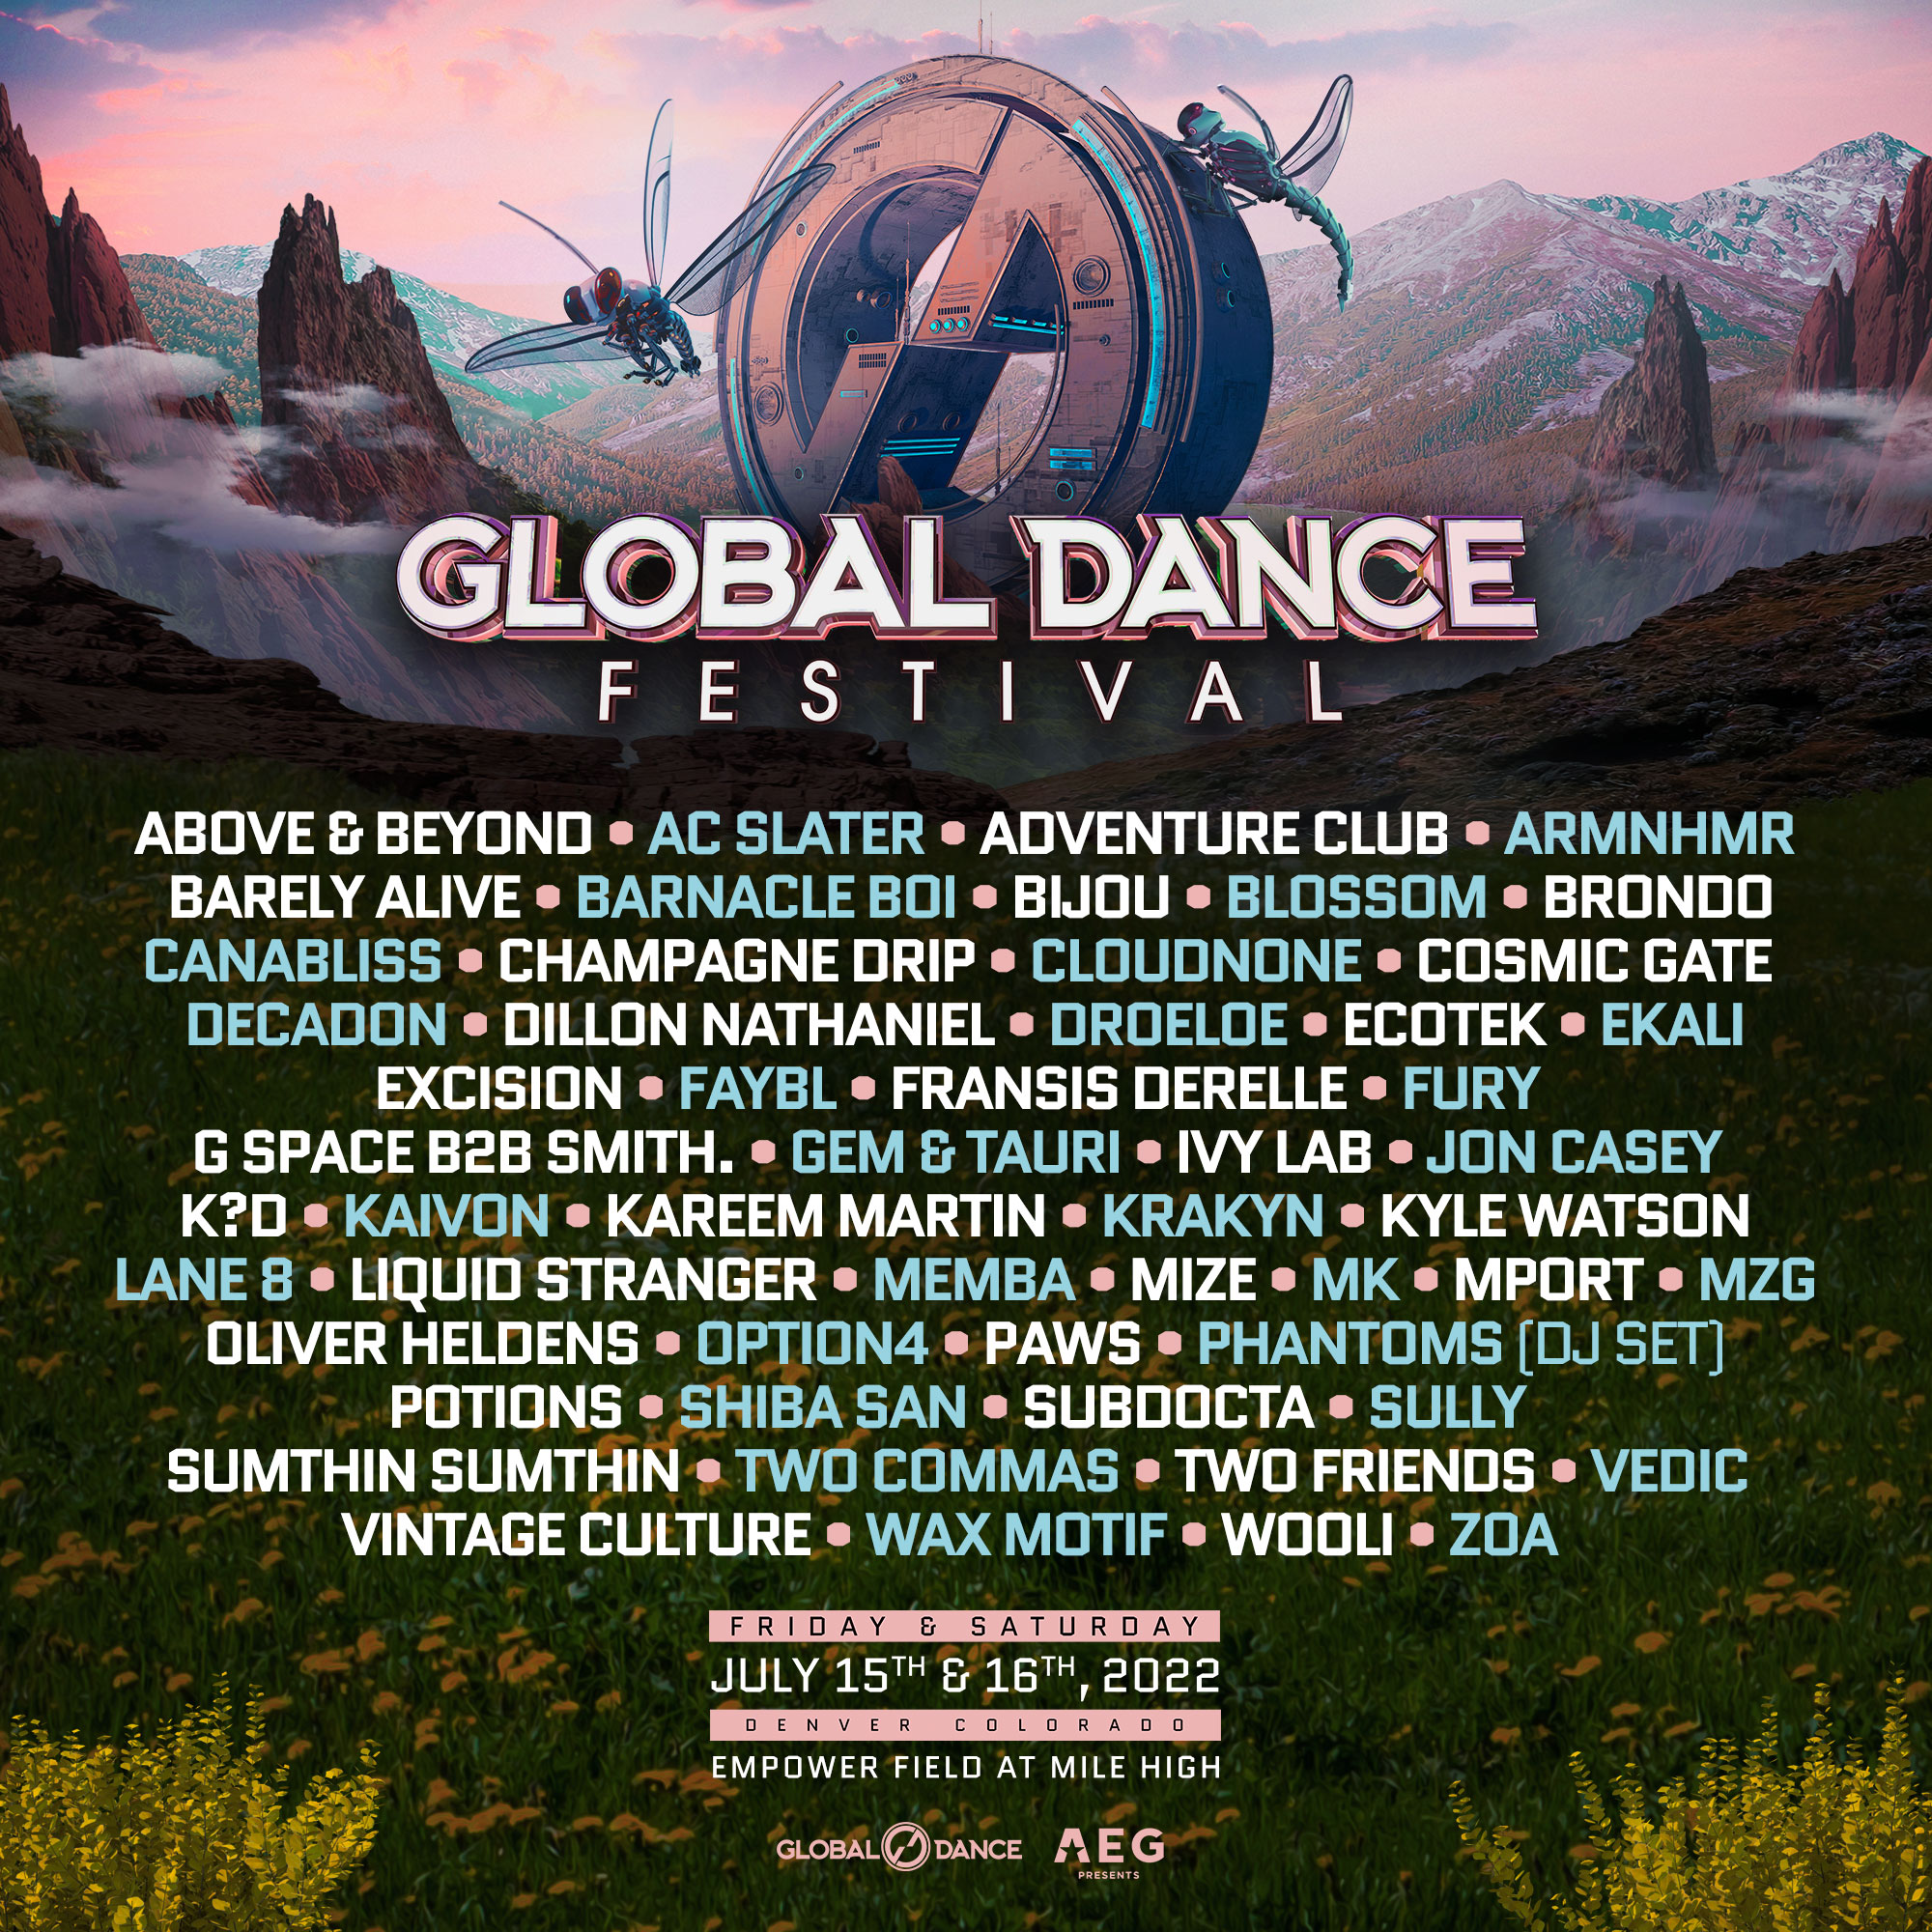 Global Dance Festival Unveils 2022 Lineup Featuring Excision, Adventure